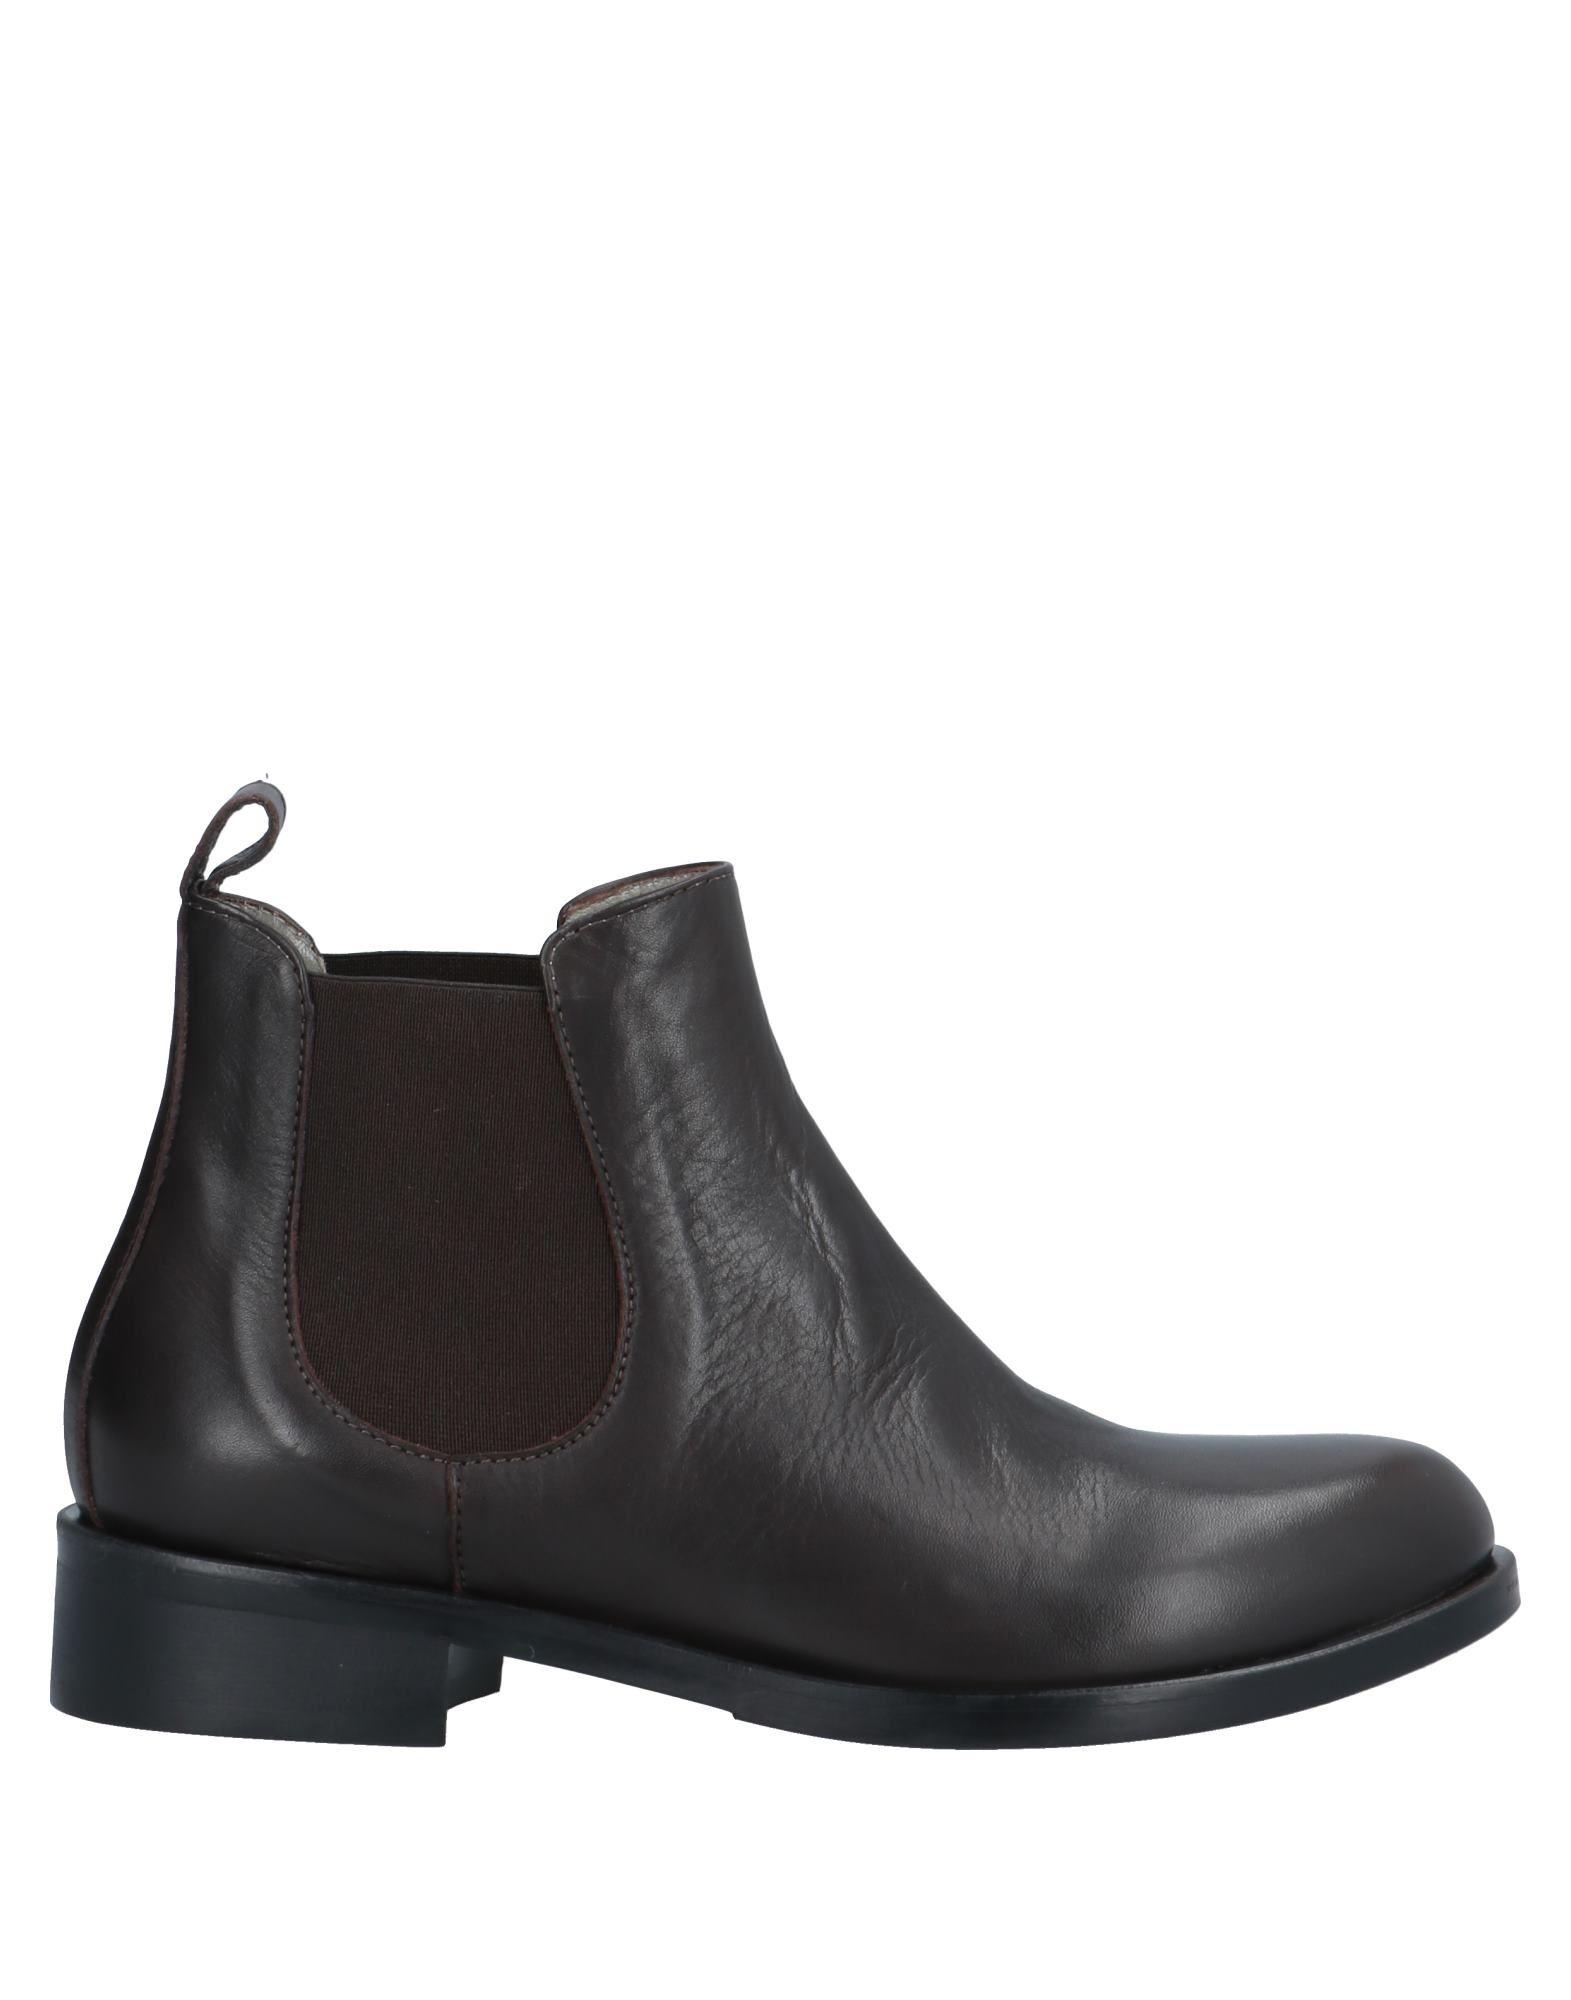 Massimo Rebecchi Leather Ankle Boots in Dark Brown (Brown) - Lyst